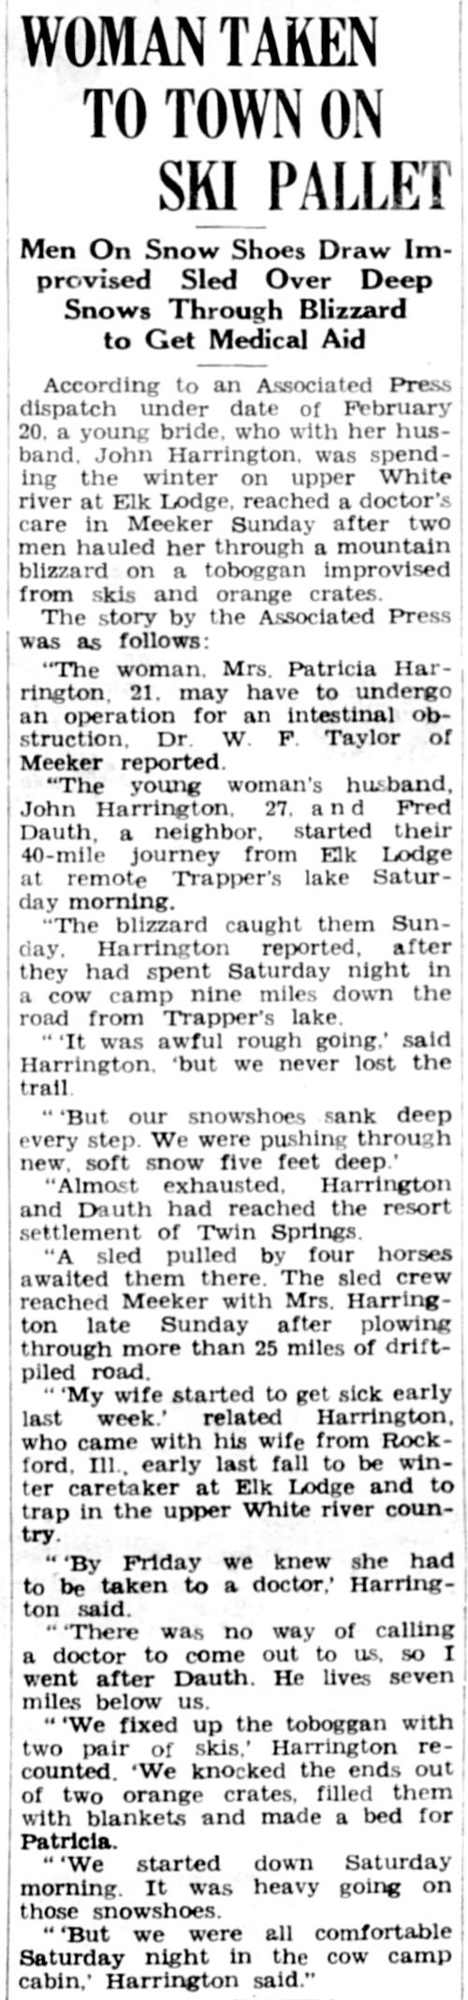 Dauth Family Archive - 1939-02-22 - The Craig Empire Courier -  Fred Dauth Helps Save A Sick Person During Blizzard